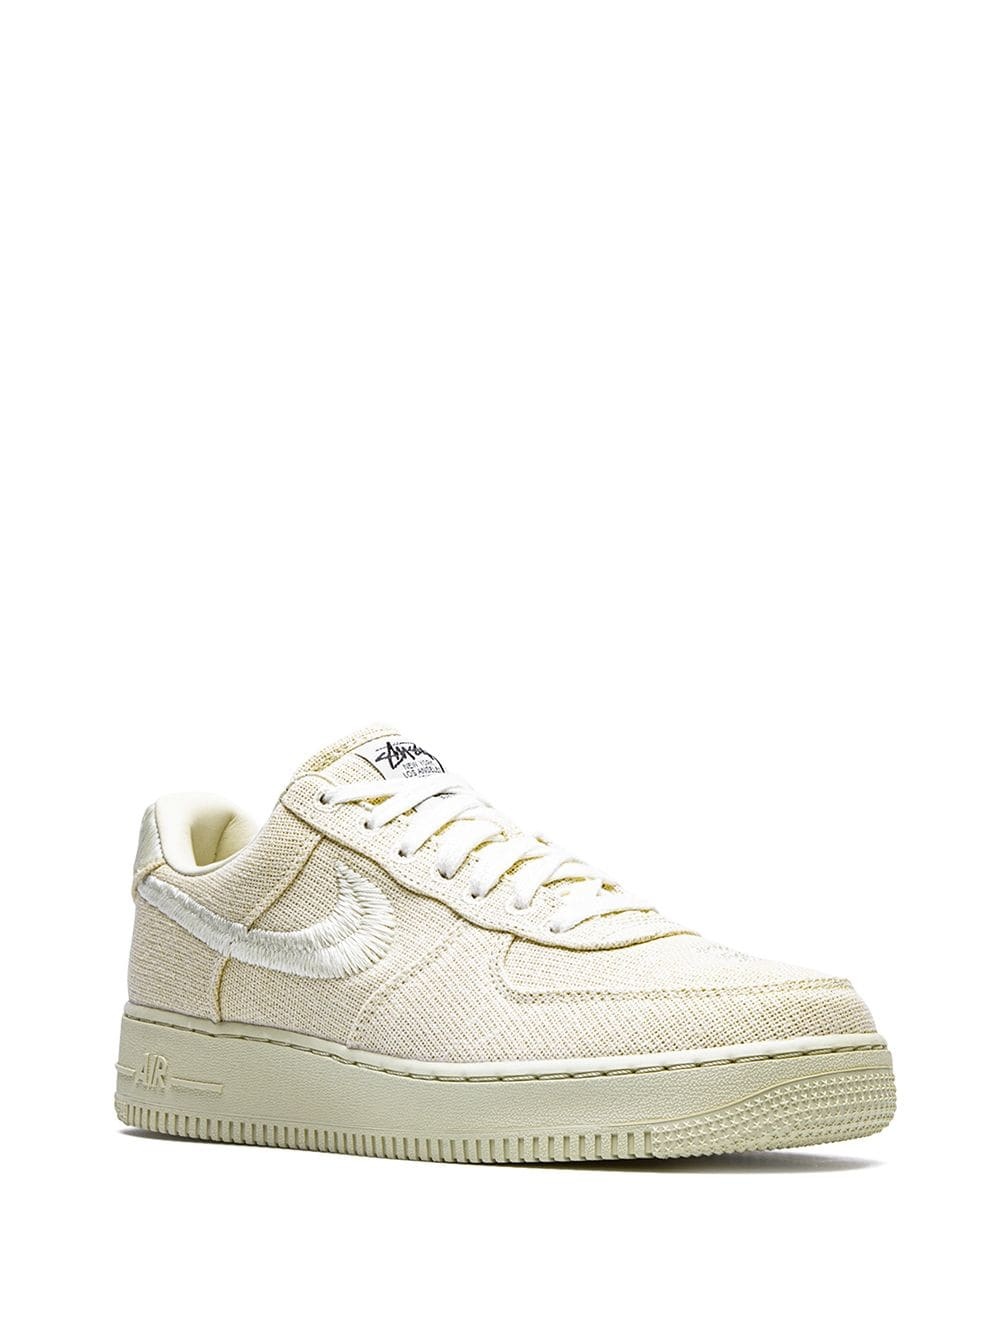 x Stussy Air Force 1 Low "Fossil" sneakers - 2